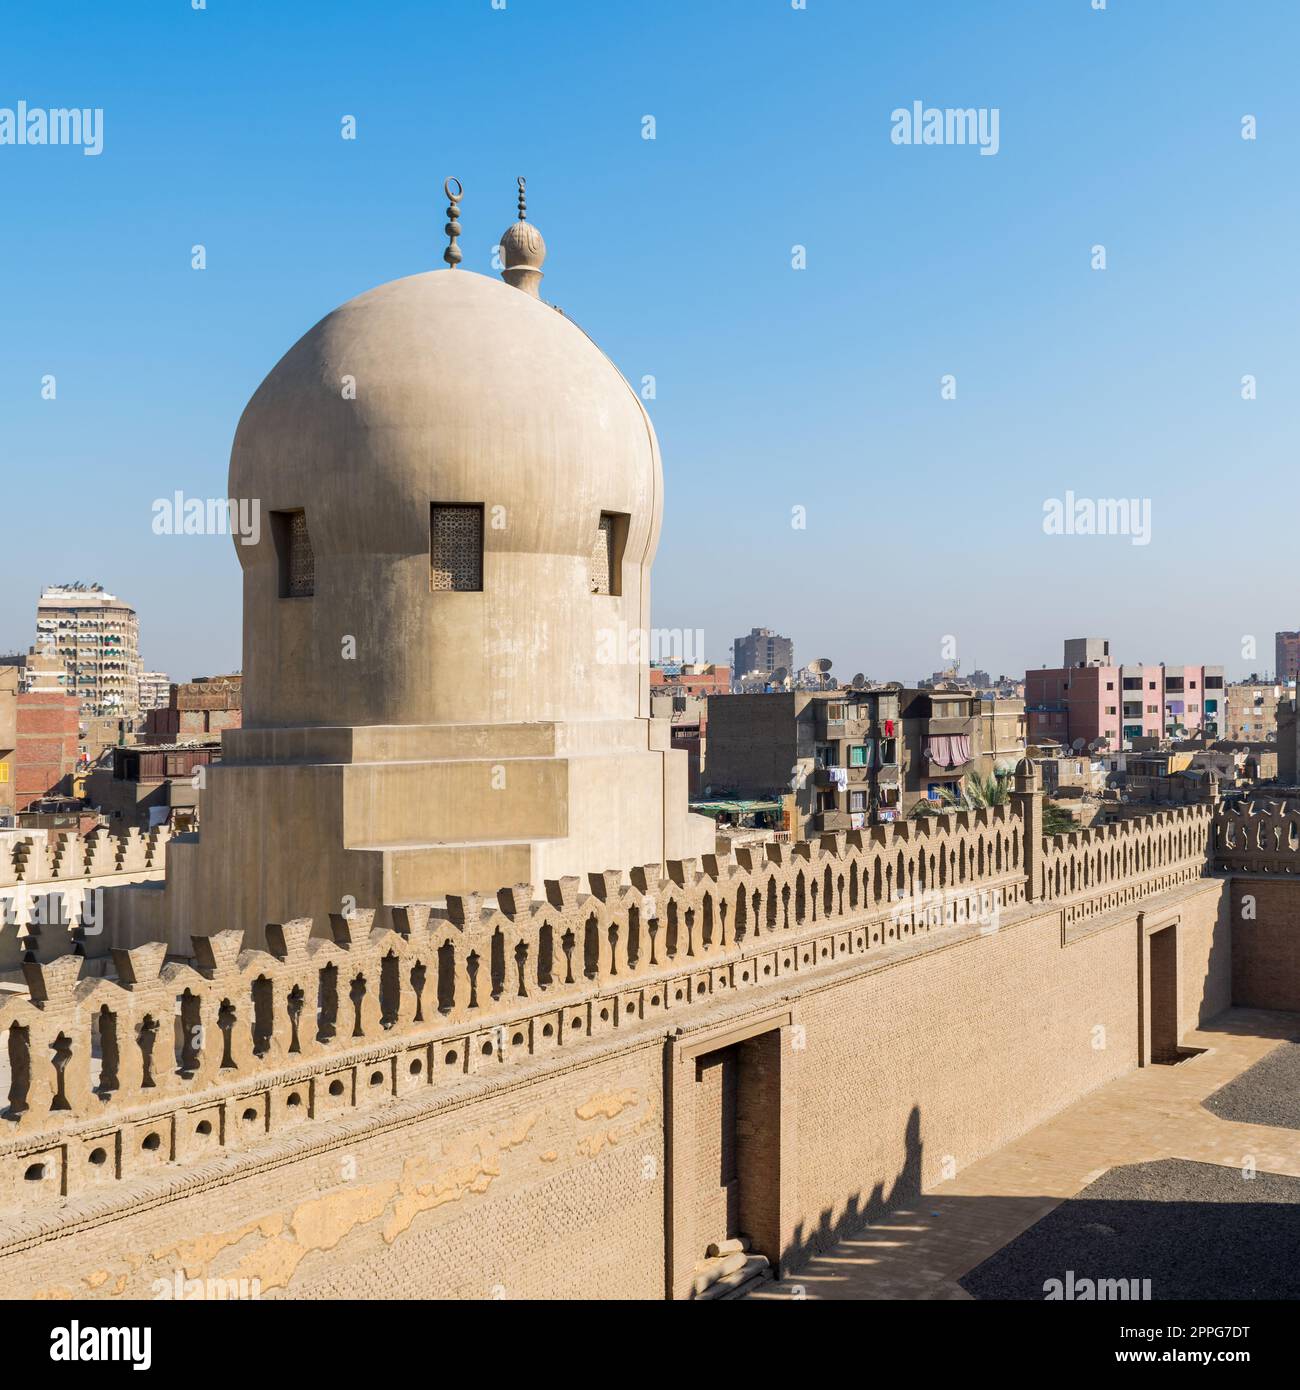 Fence of Ibn Tulun Mosque revealing dome of Amir Sarghatmish mosque, Cairo, Egypt Stock Photo